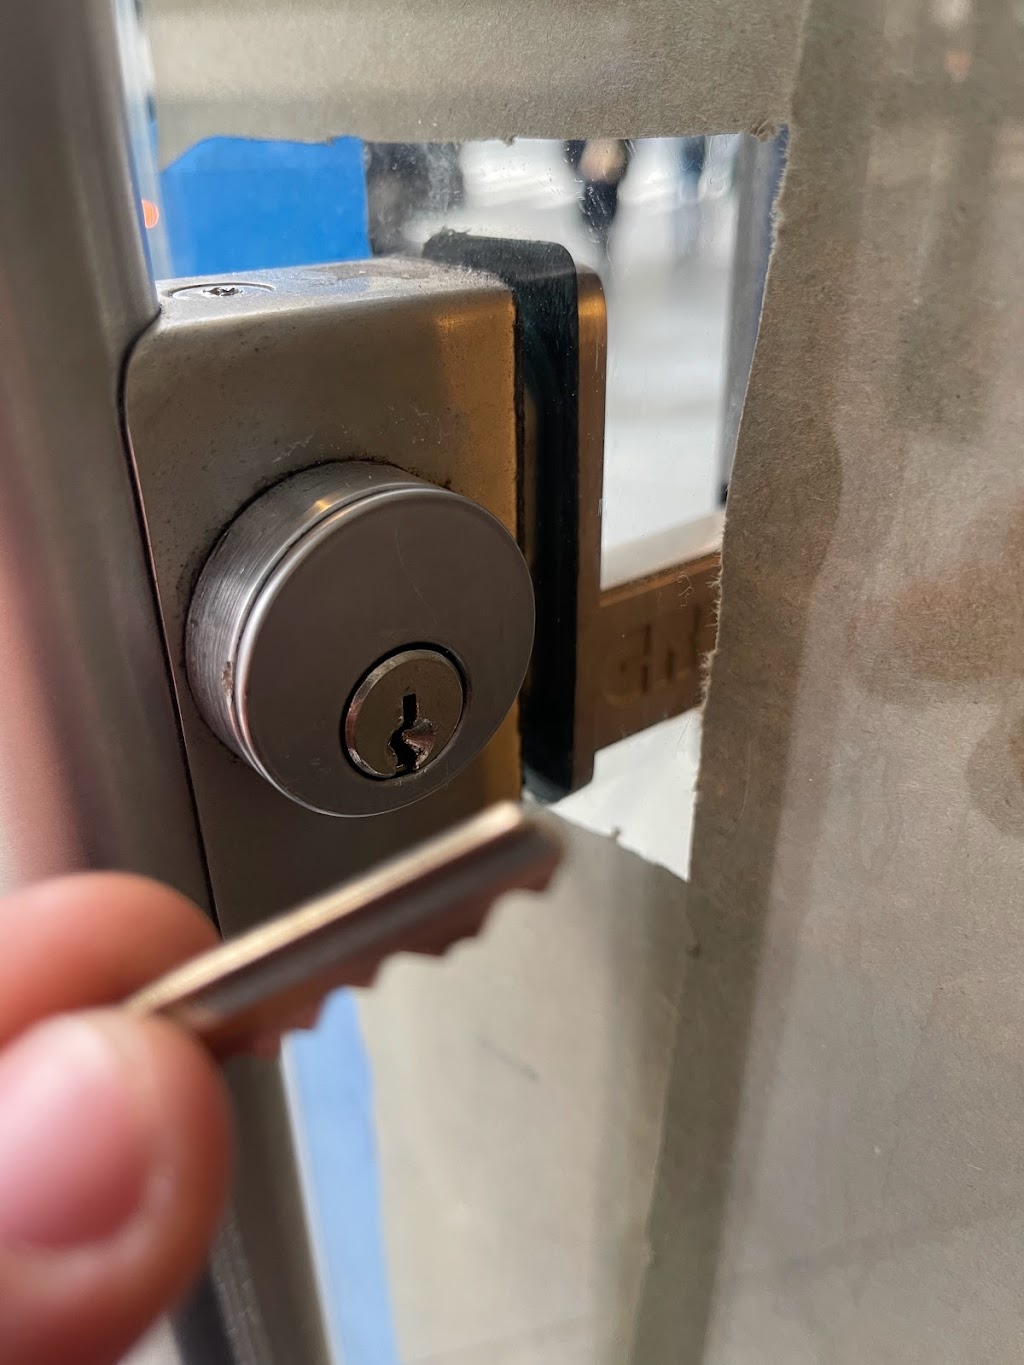 Queens Locksmith & Security System | 10214 159th Rd, Queens, NY 11414 | Phone: (929) 530-6617